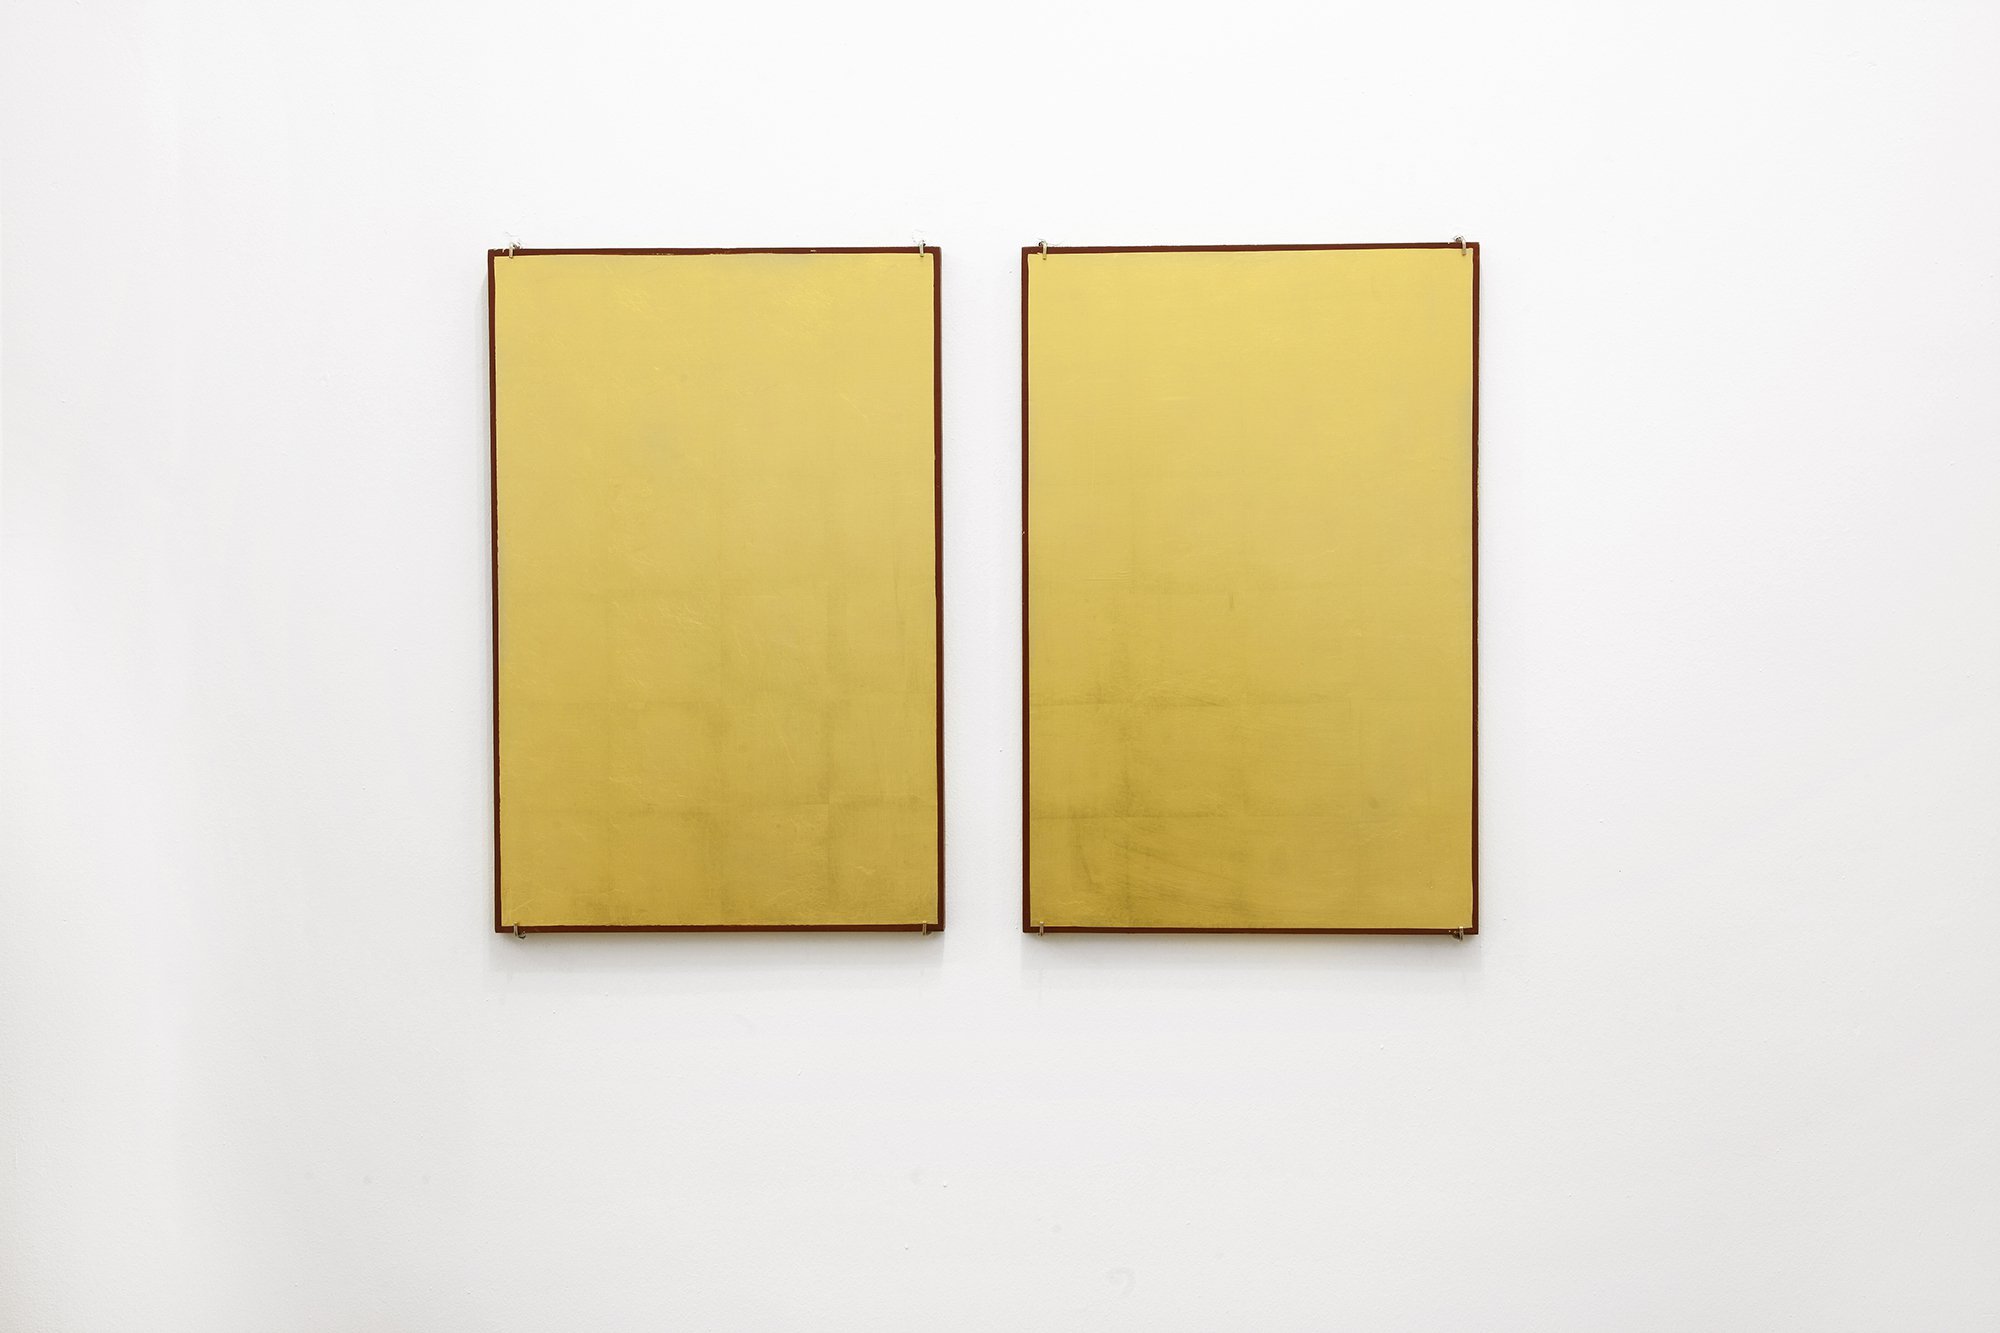 Christodoulos Panayiotou, Untitled, diptych, painting and gold on wood, 39 x 59 cm (each), 2012. Installation view, Tenuto, Rodeo, Istanbul, 2012 – 2013